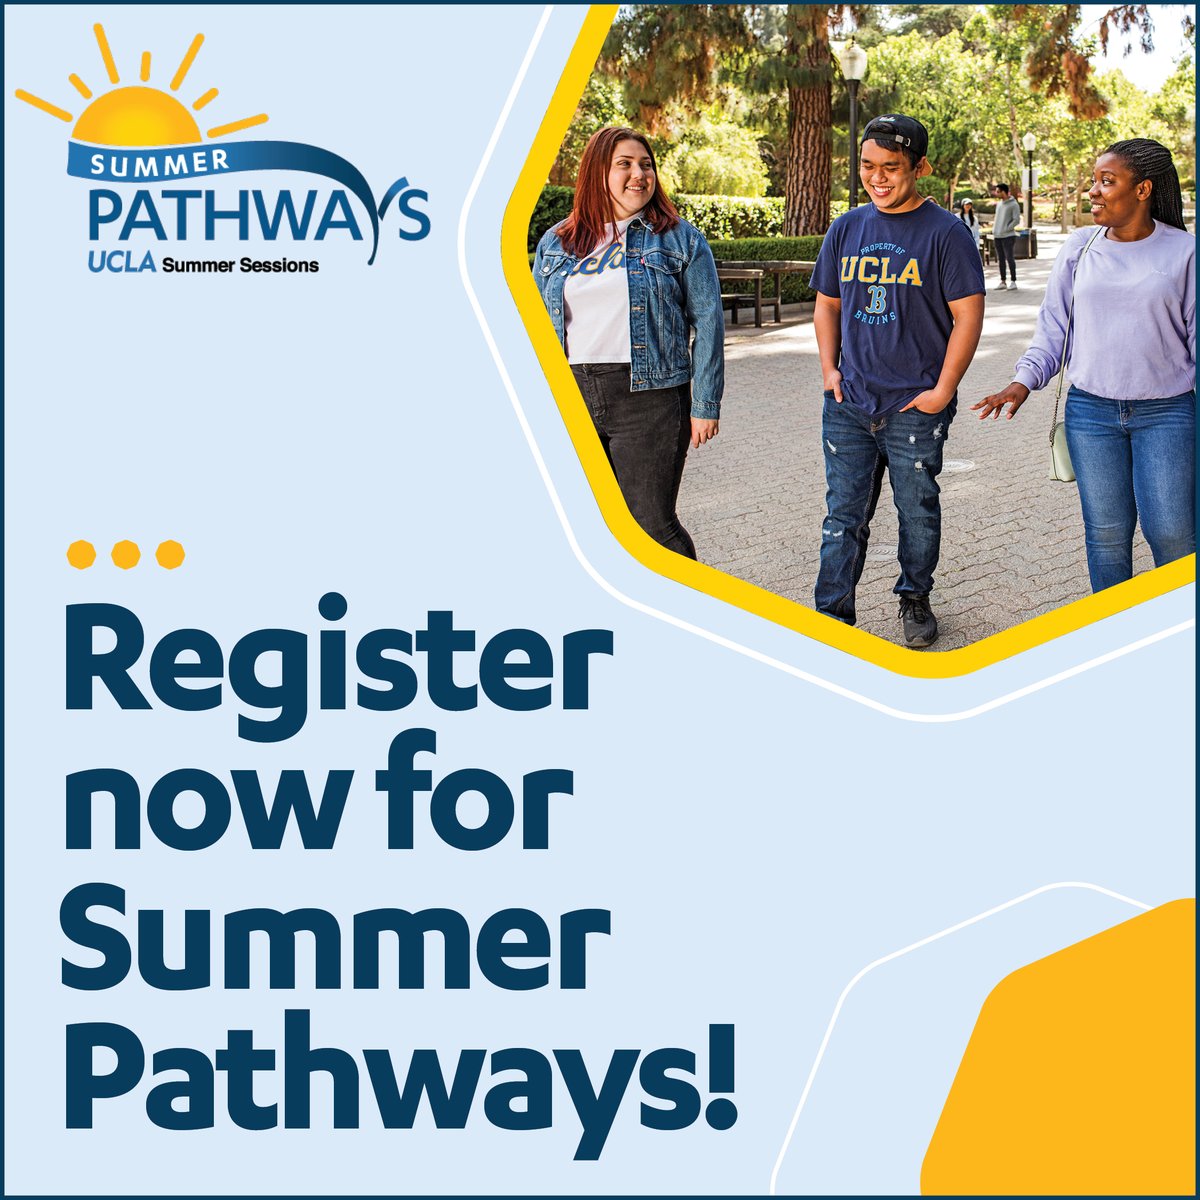 Join our webinar on April 18 to learn more about Summer Pathways, a new Summer Sessions program for UCLA students! Chart your unique academic path through thoughtful major selection and take advantage of early access to college academic counseling. bit.ly/uclasummerpath…